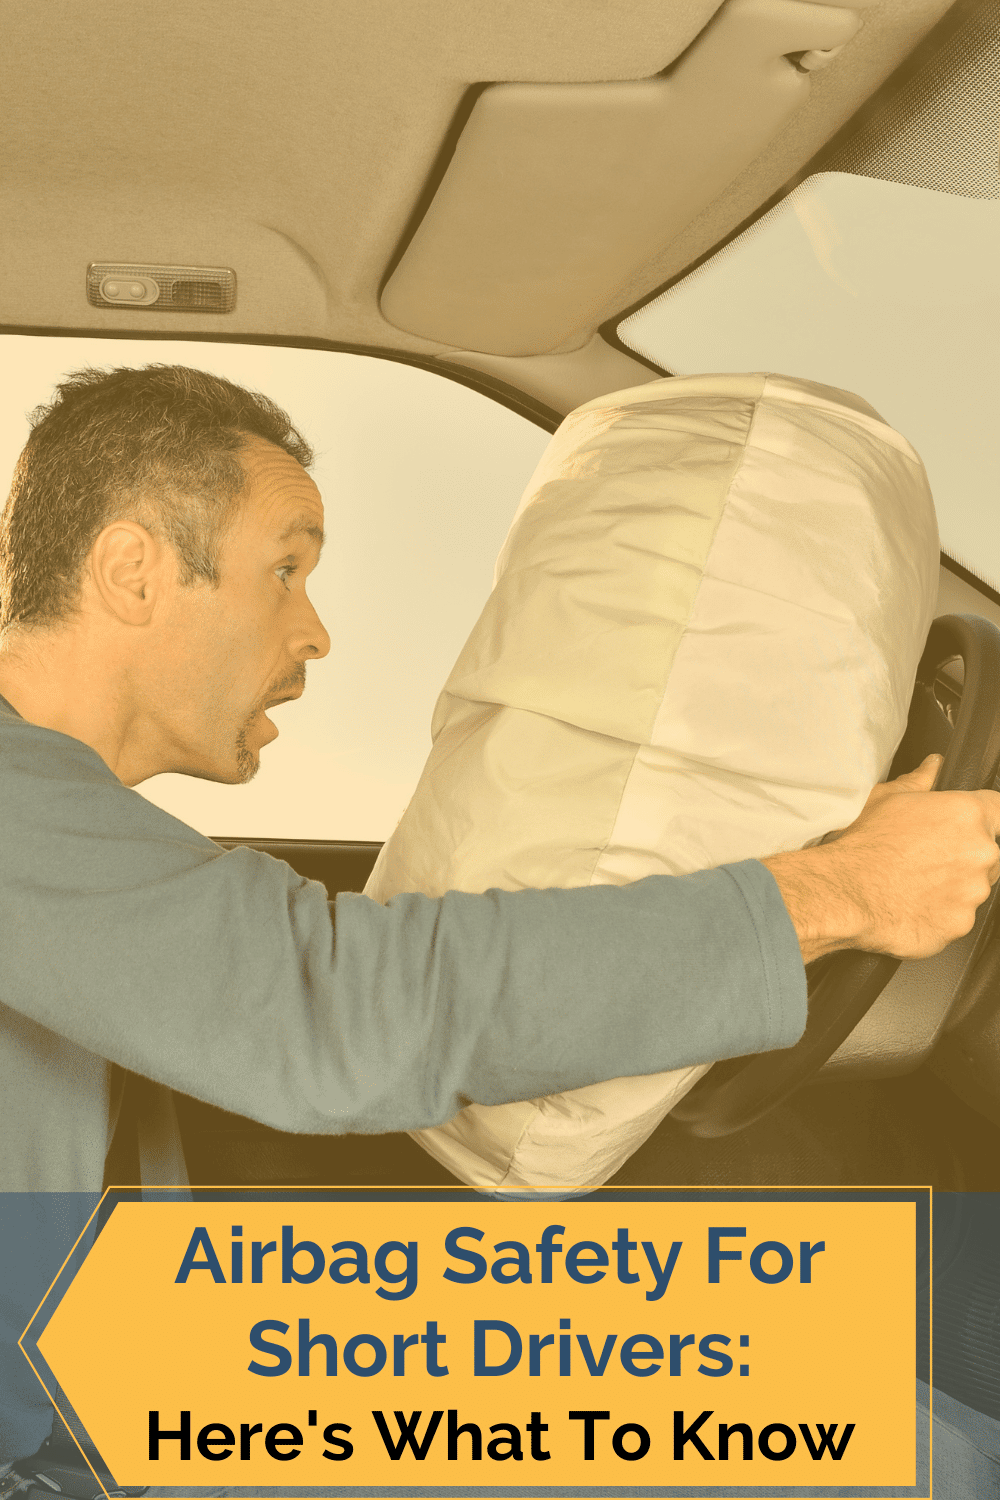 https://www.michiganautolaw.com/wp-content/uploads/2021/06/Airbag-Safety-For-Short-Drivers-Heres-What-To-Know-Pinterest.png